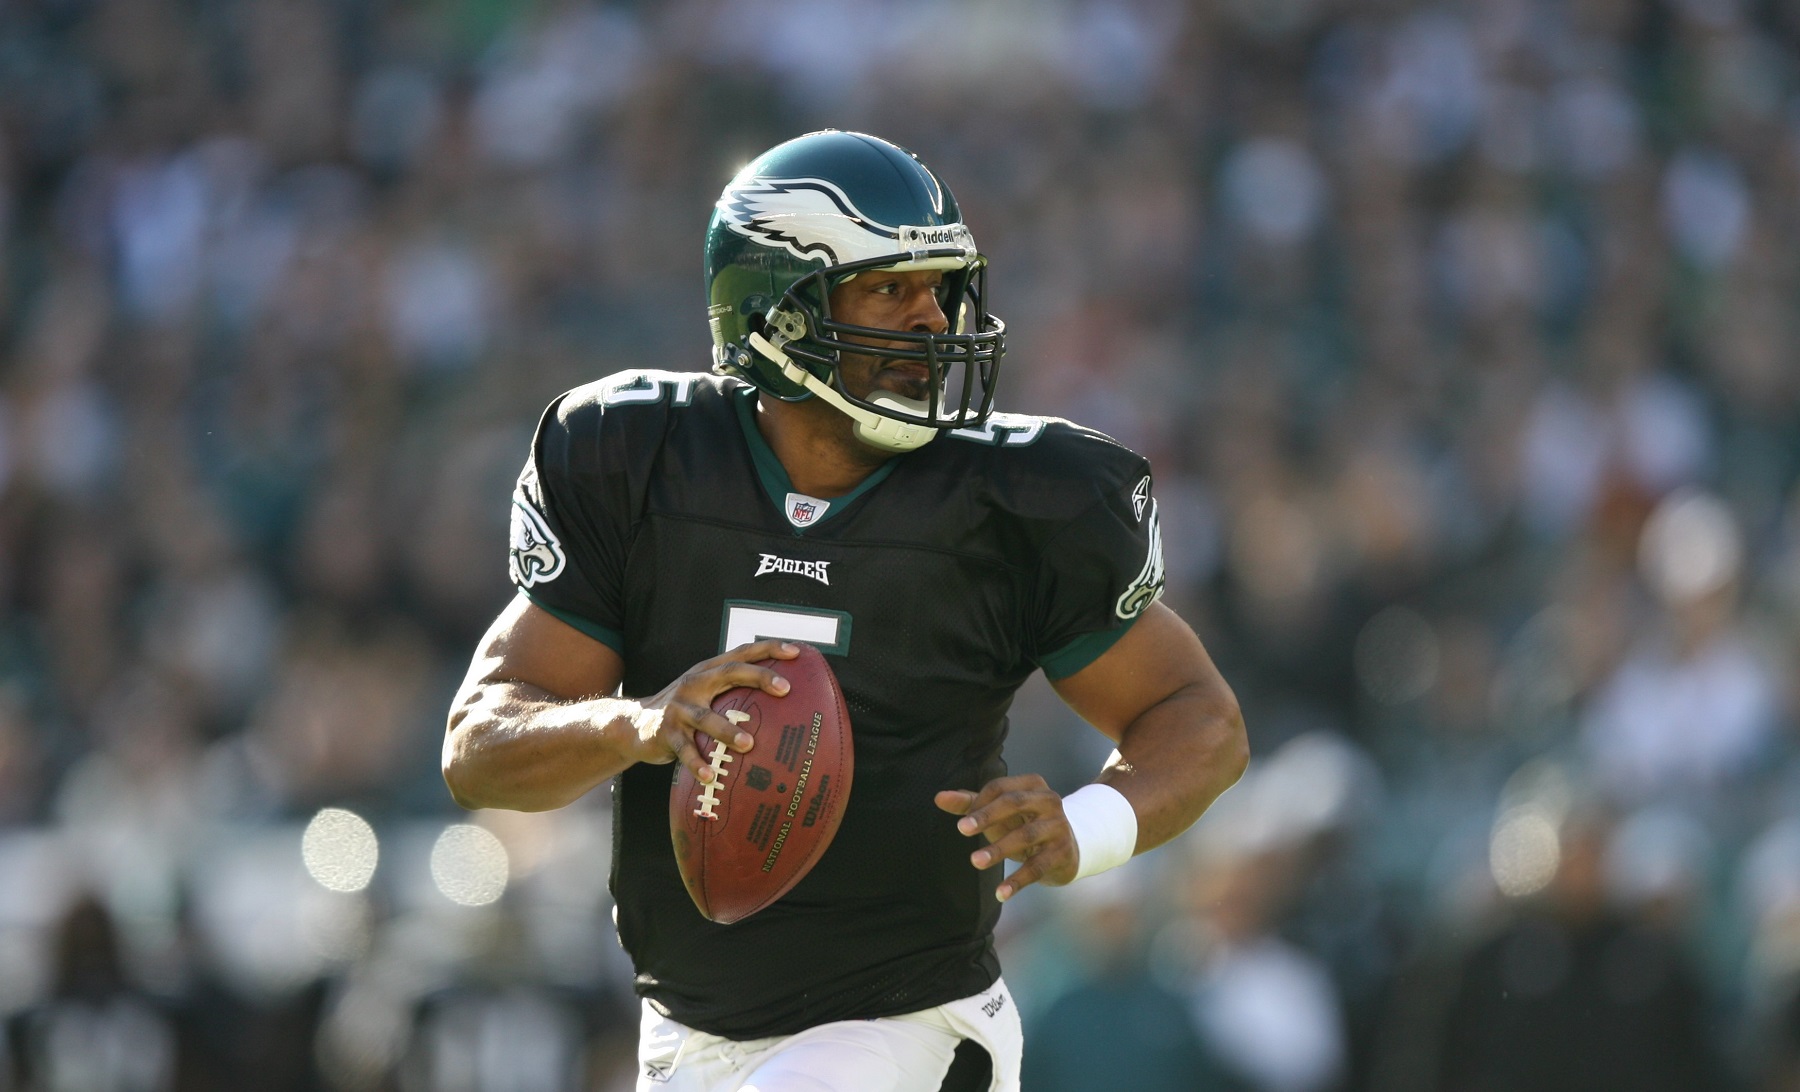 What Did Rush Limbaugh Say About Donovan McNabb That Cost